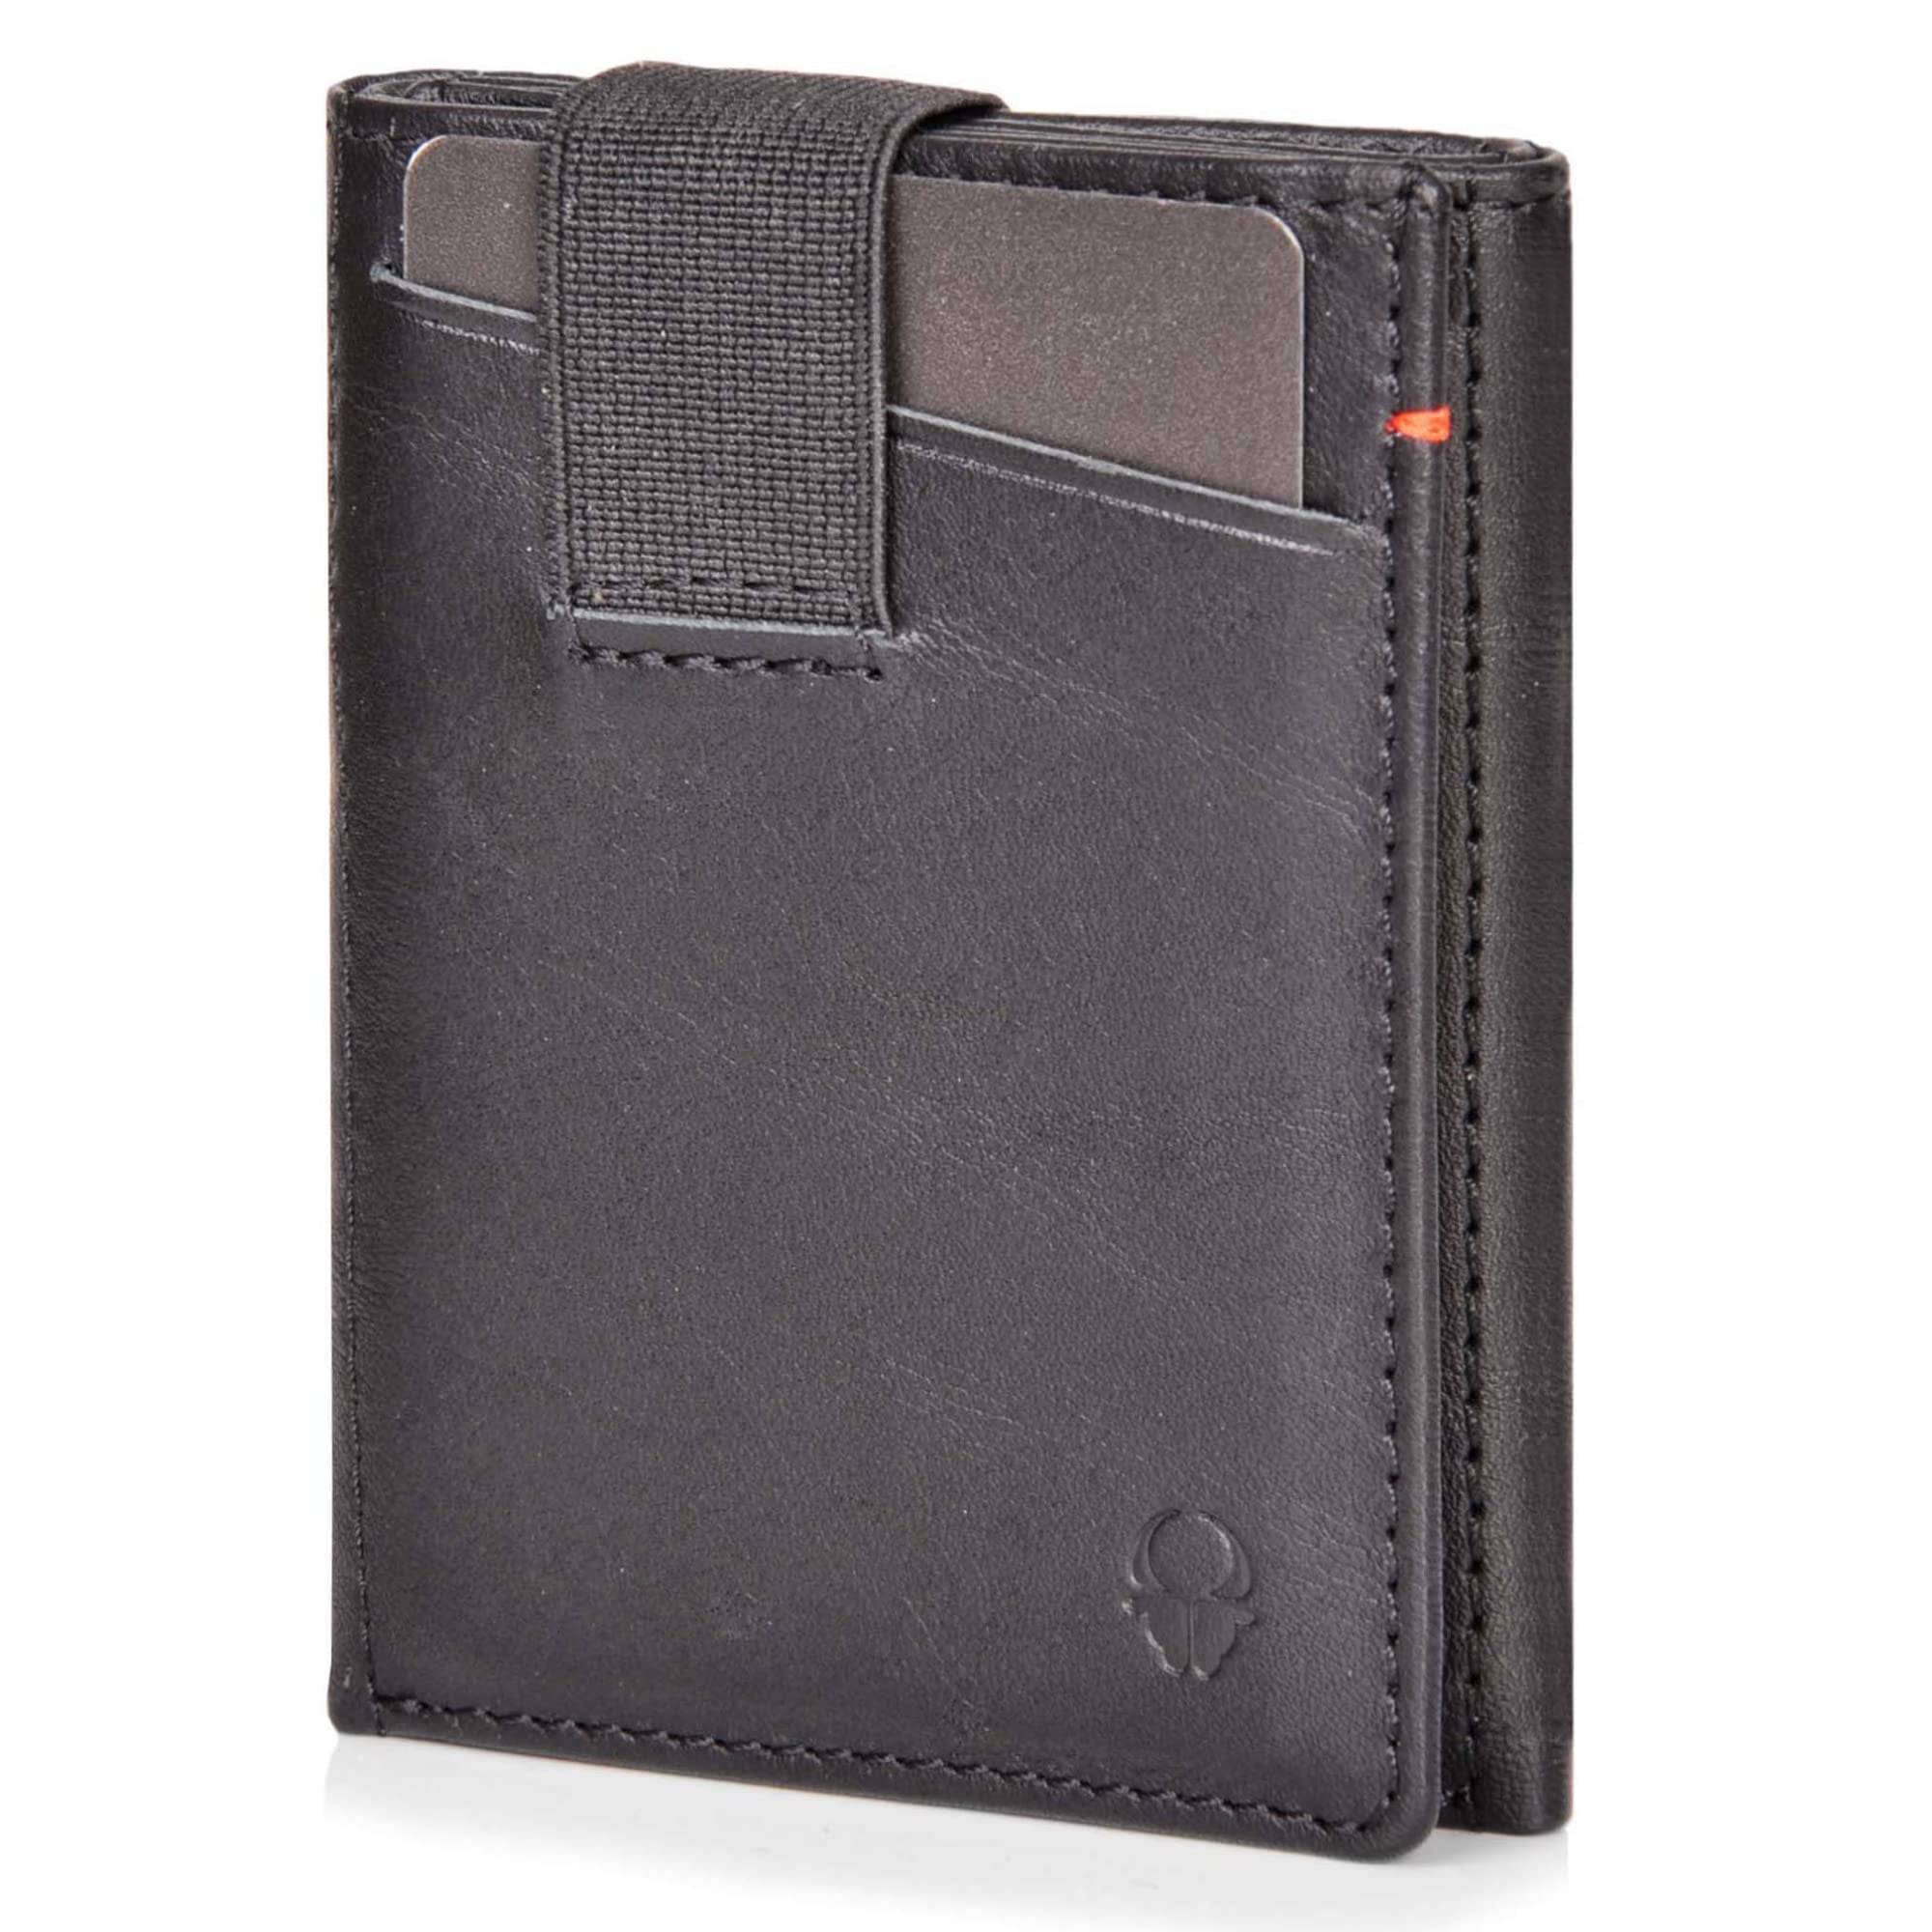 The Decoy Wallet, Leather Anti-Theft Wallet, Pickpocket Defense, All Ages 